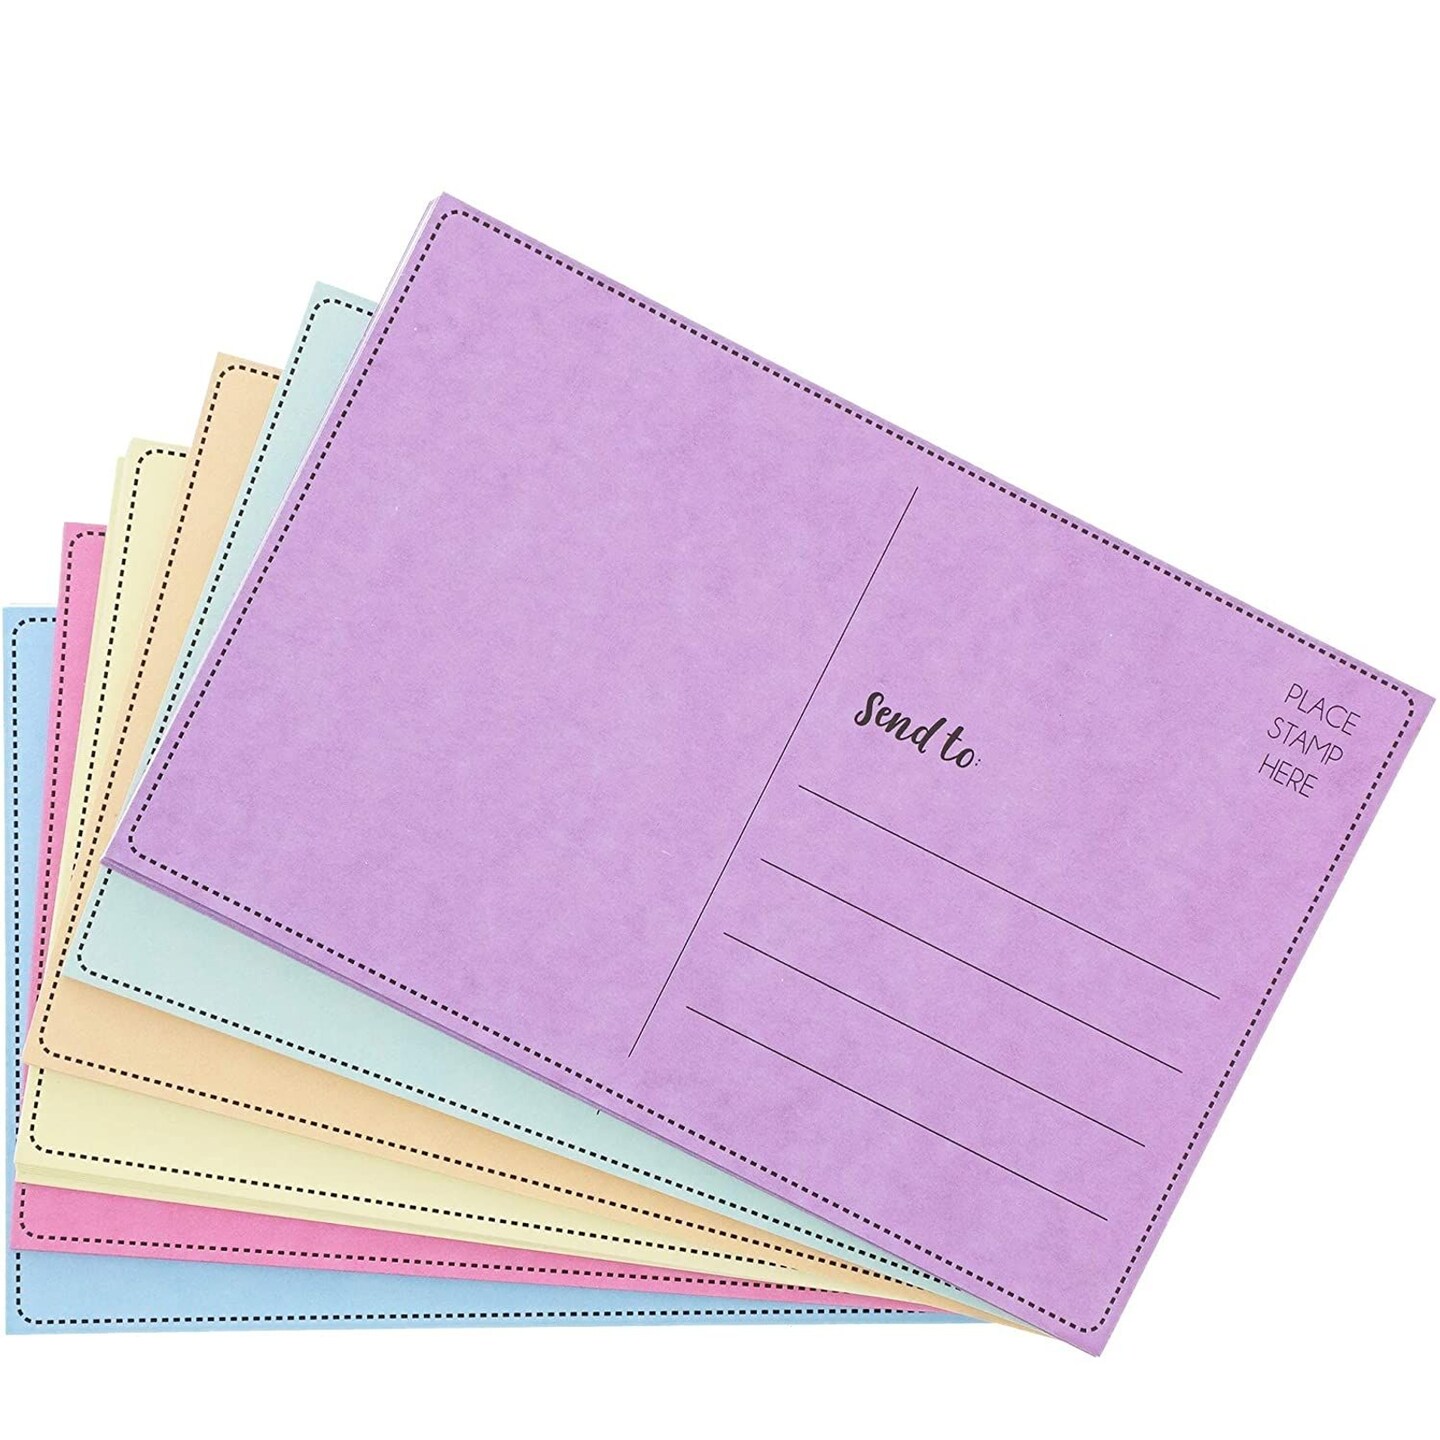 Multicolored Mailable Blank Postcards Pack of 48 &#x2013; 4 x 6 inches